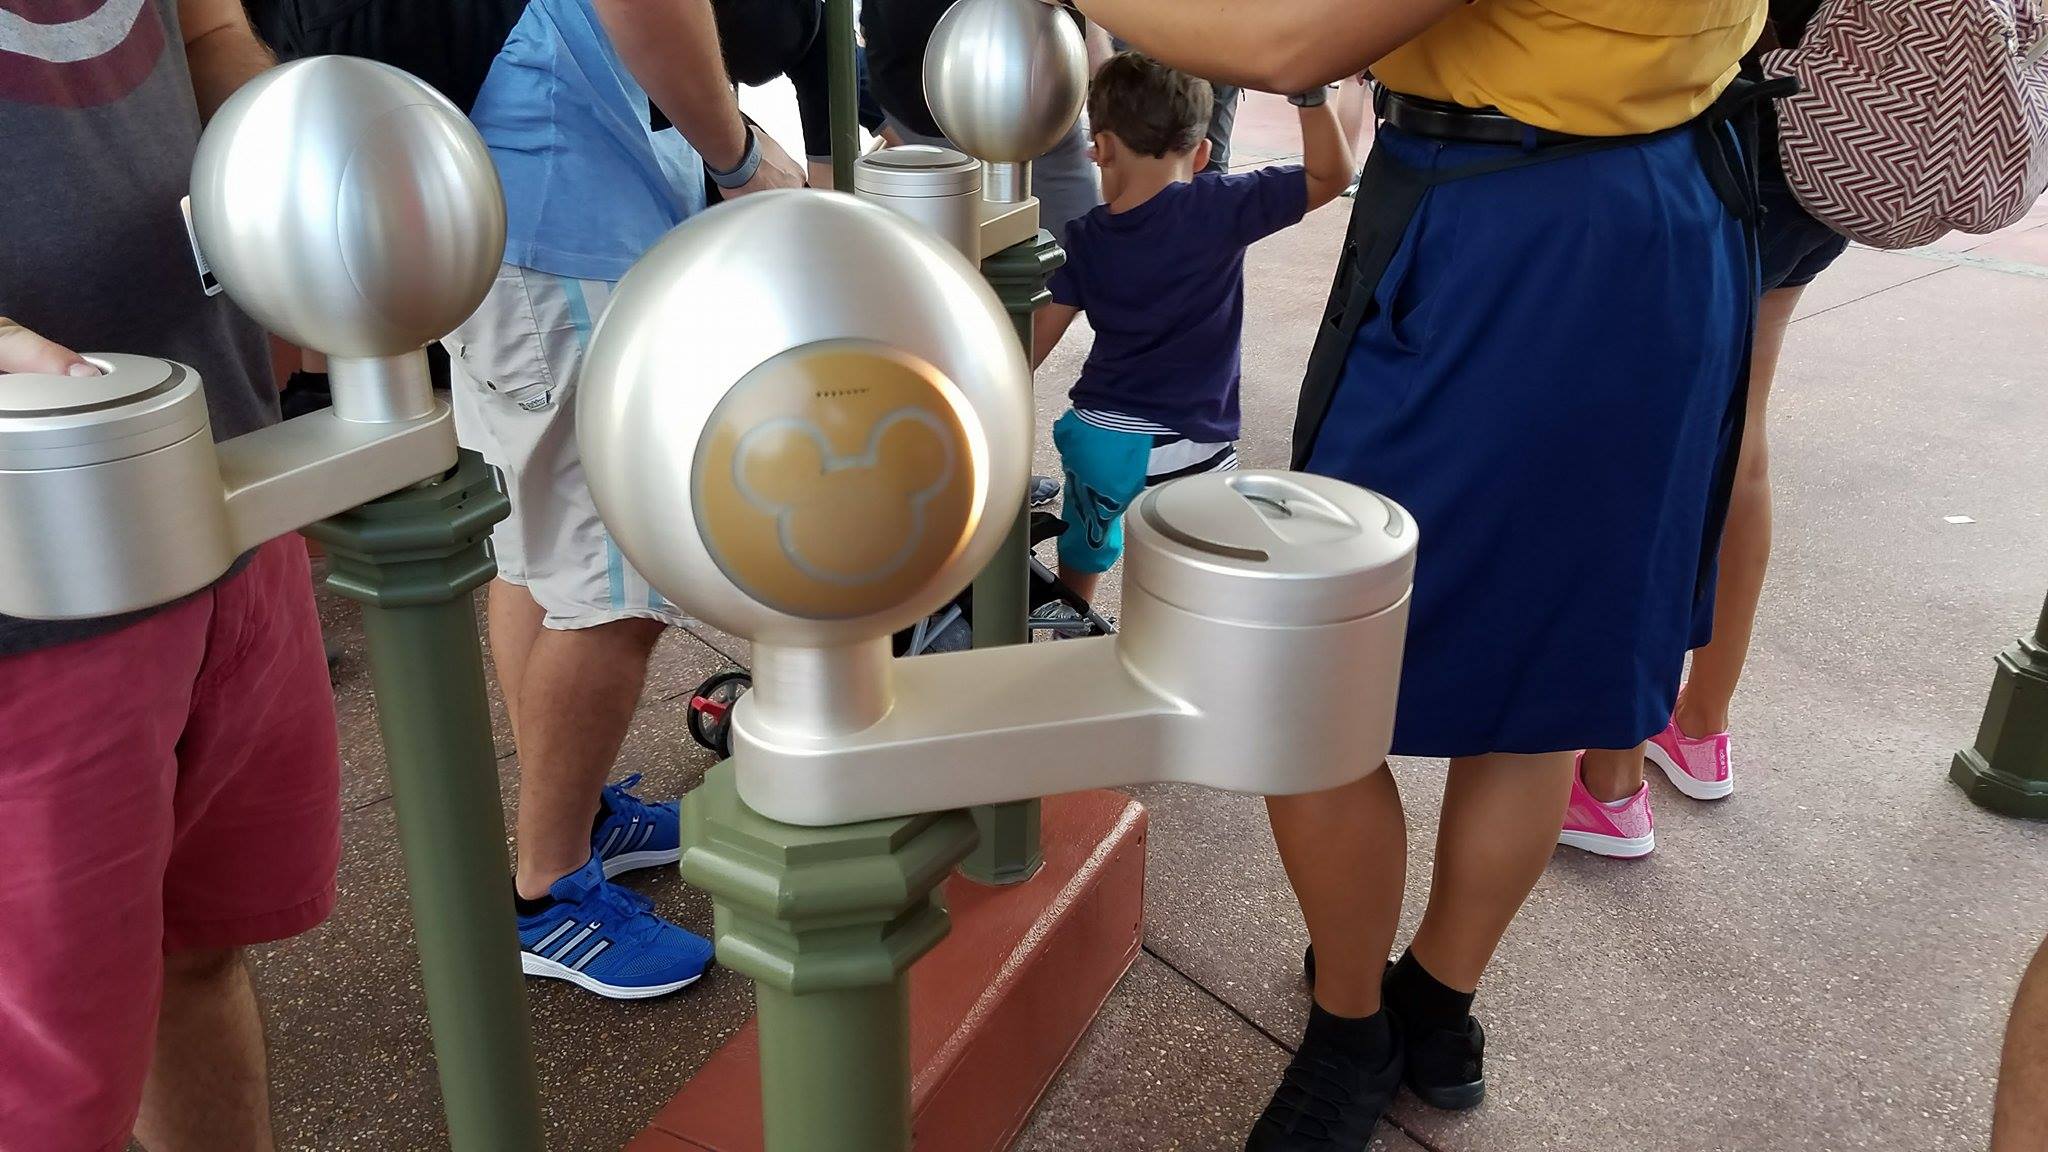 Disney World Plans to Lock MDE Accounts of Guests Abusing the FastPass System